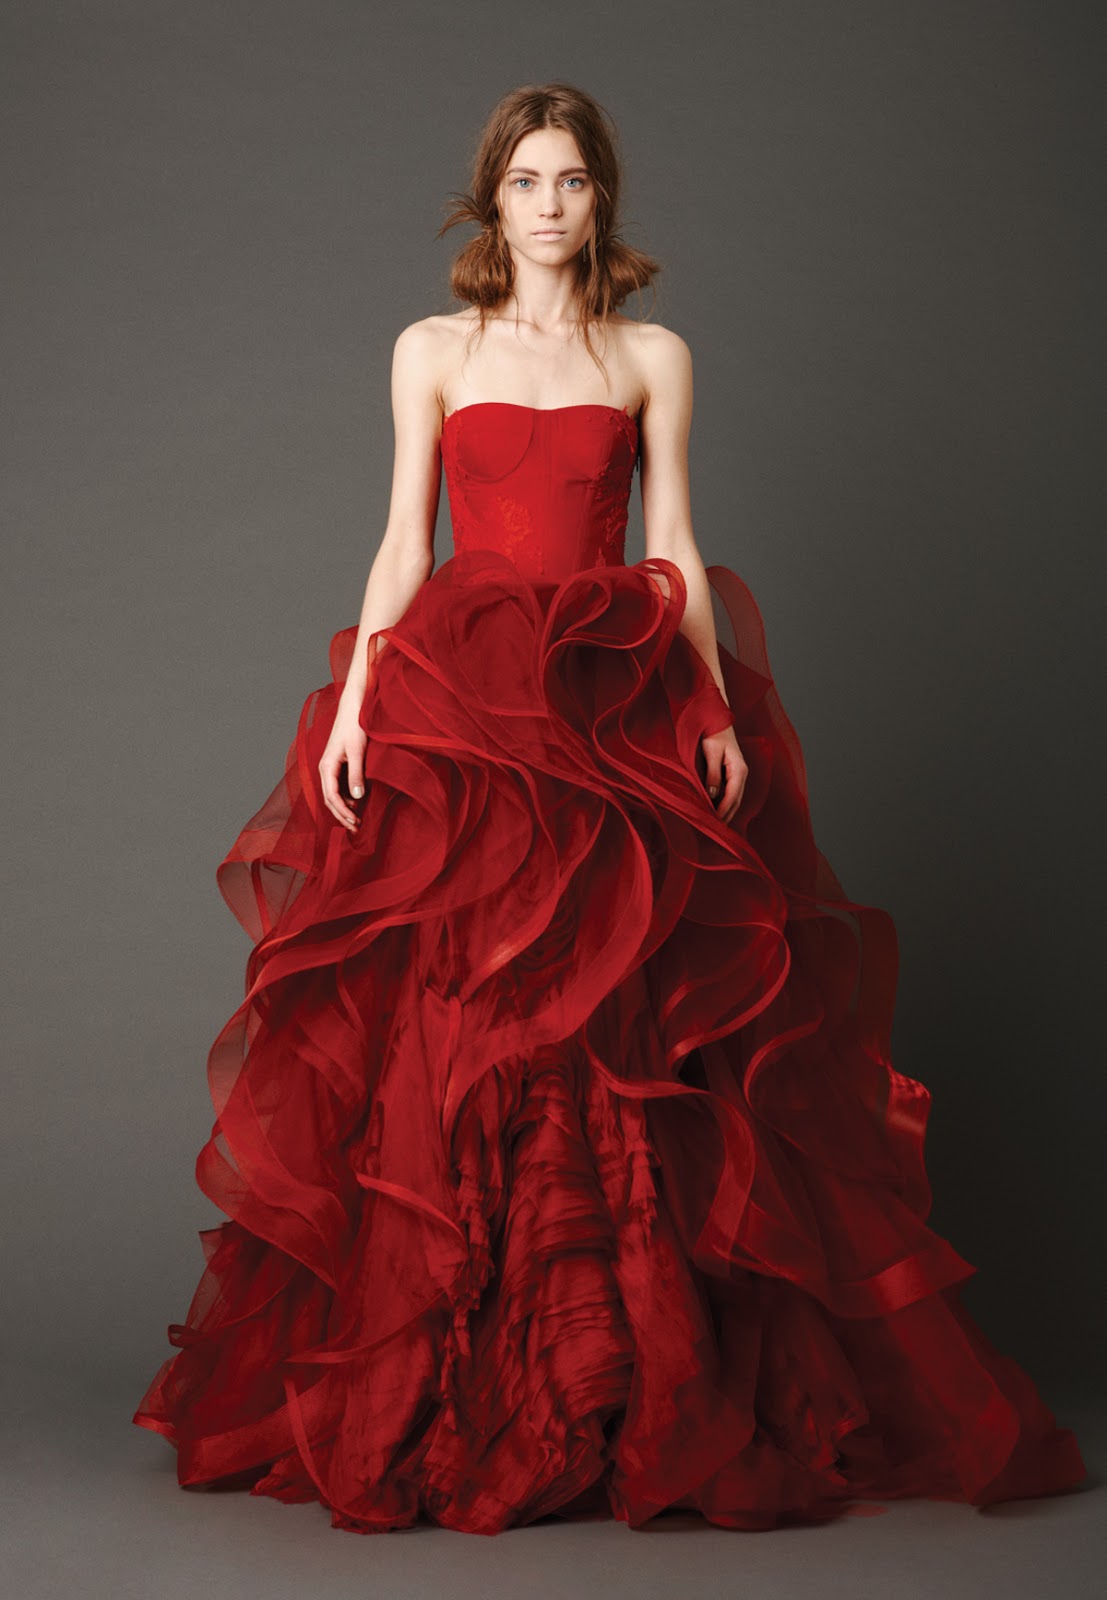 Wedding Bridesmaid Dresses Red - Perfect Choices